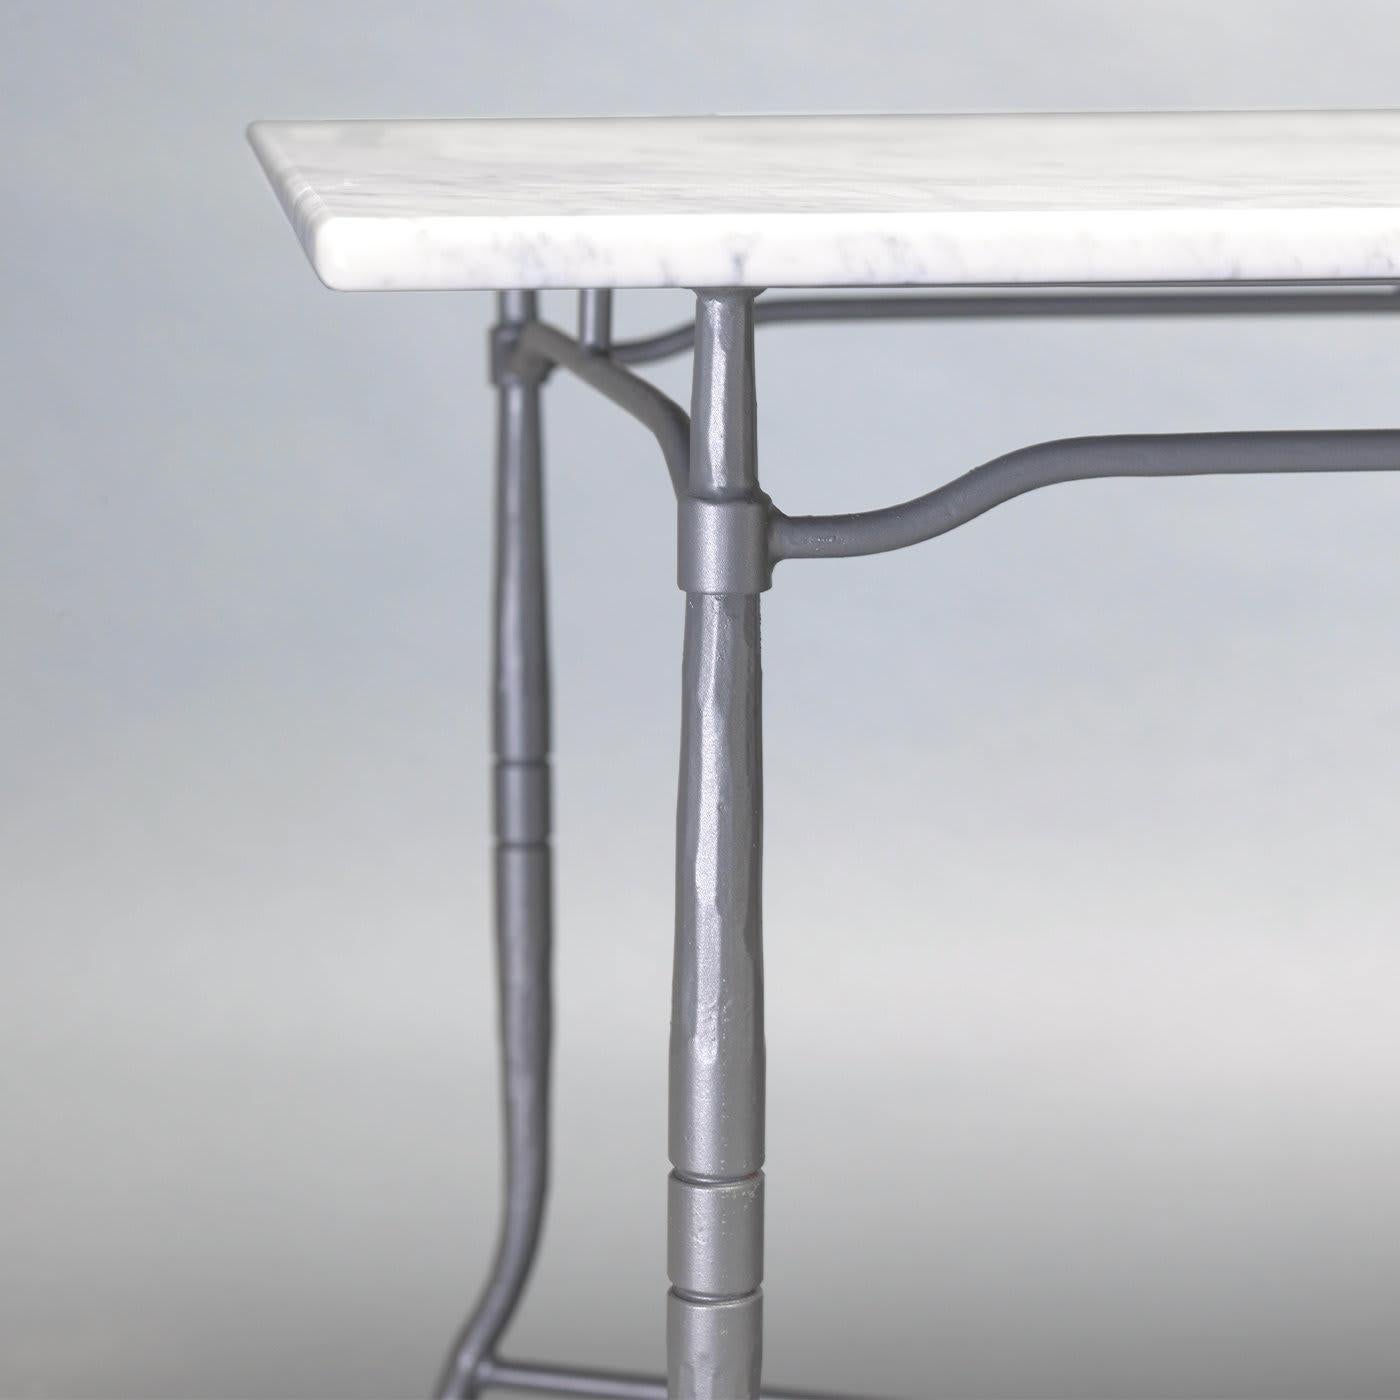 Part of the Intreccio Collection of outdoor furniture, this dining table sports a modern design that will blend perfectly with any existing decor. Practical and elegant, the white Carrara marble top, prized for its natural grey-white veining, is